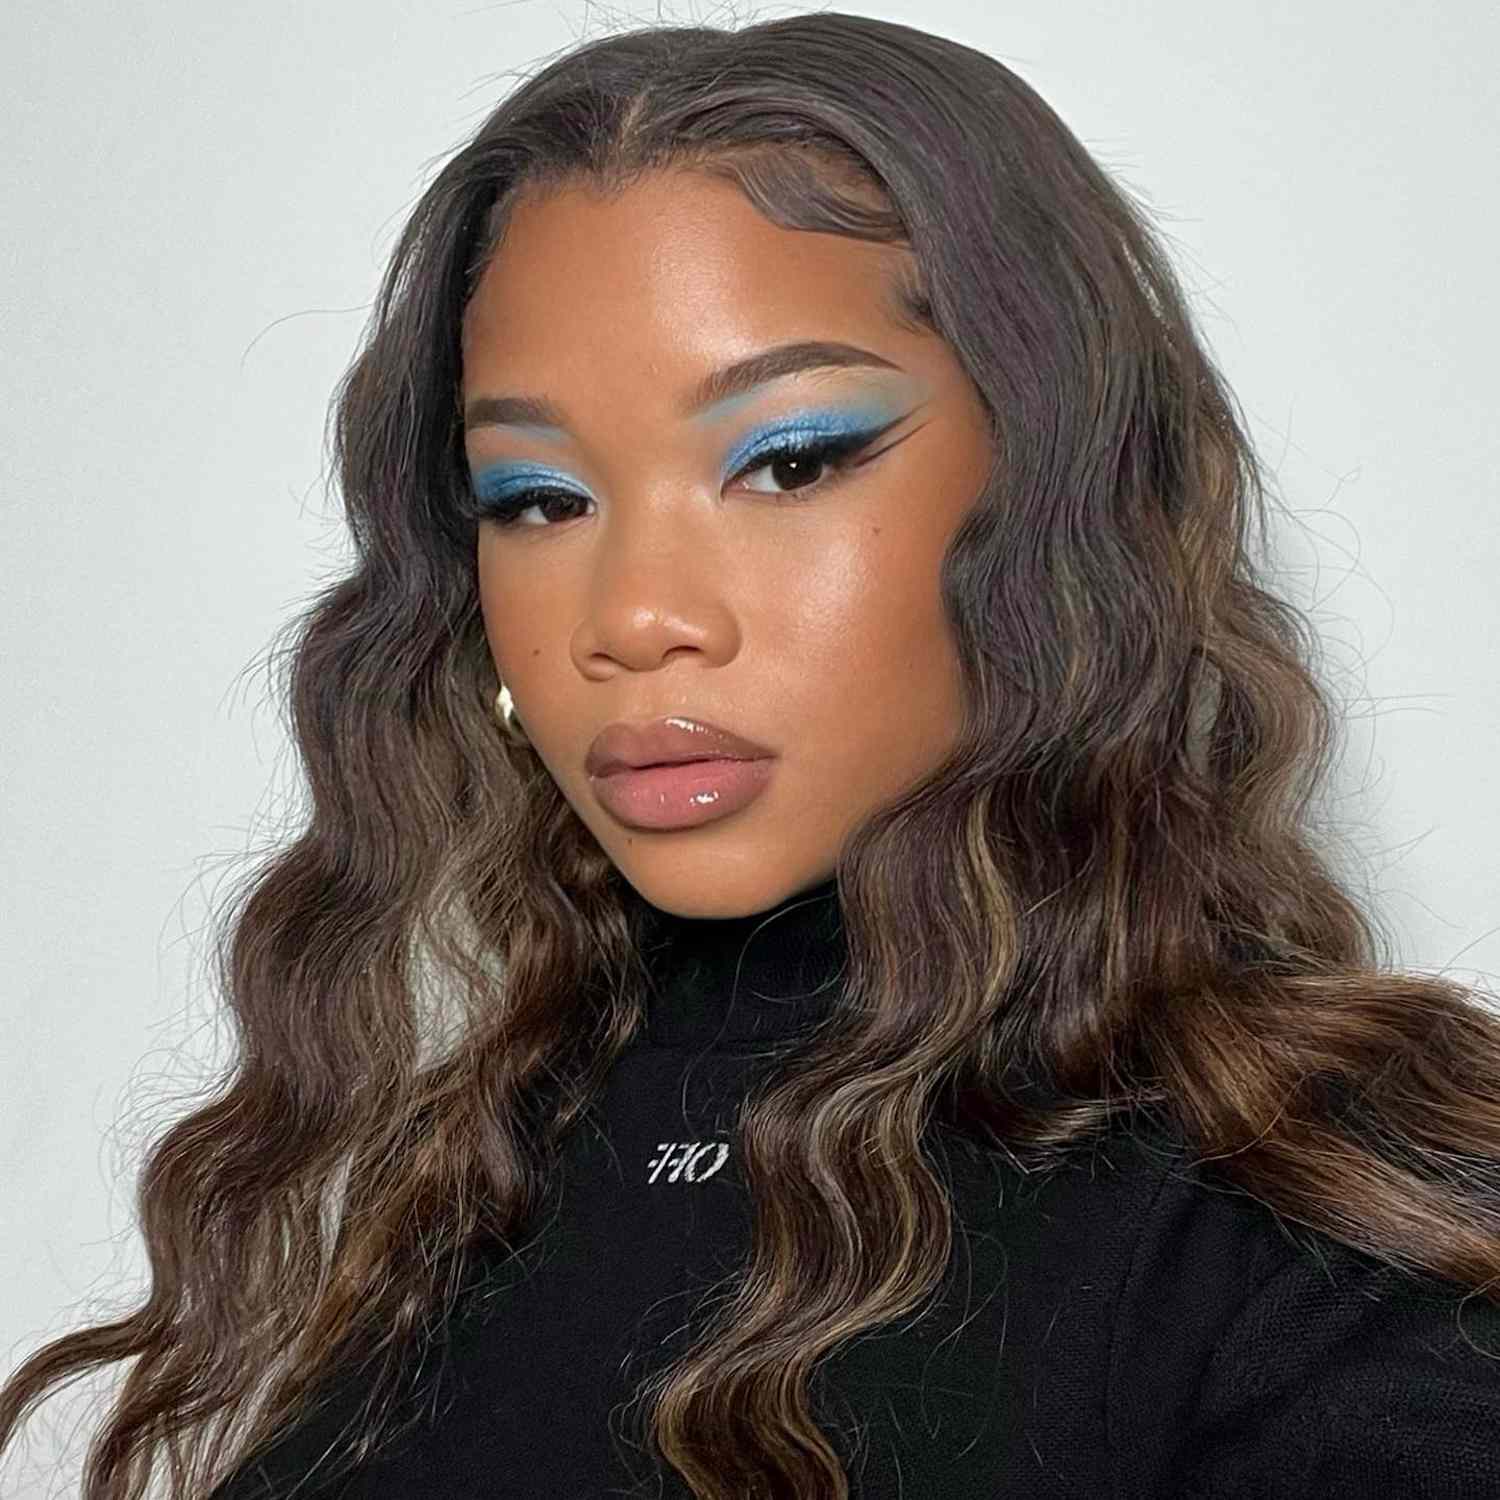 Storm Reid wears a defined wavy hairstyle and blue eyeshadow